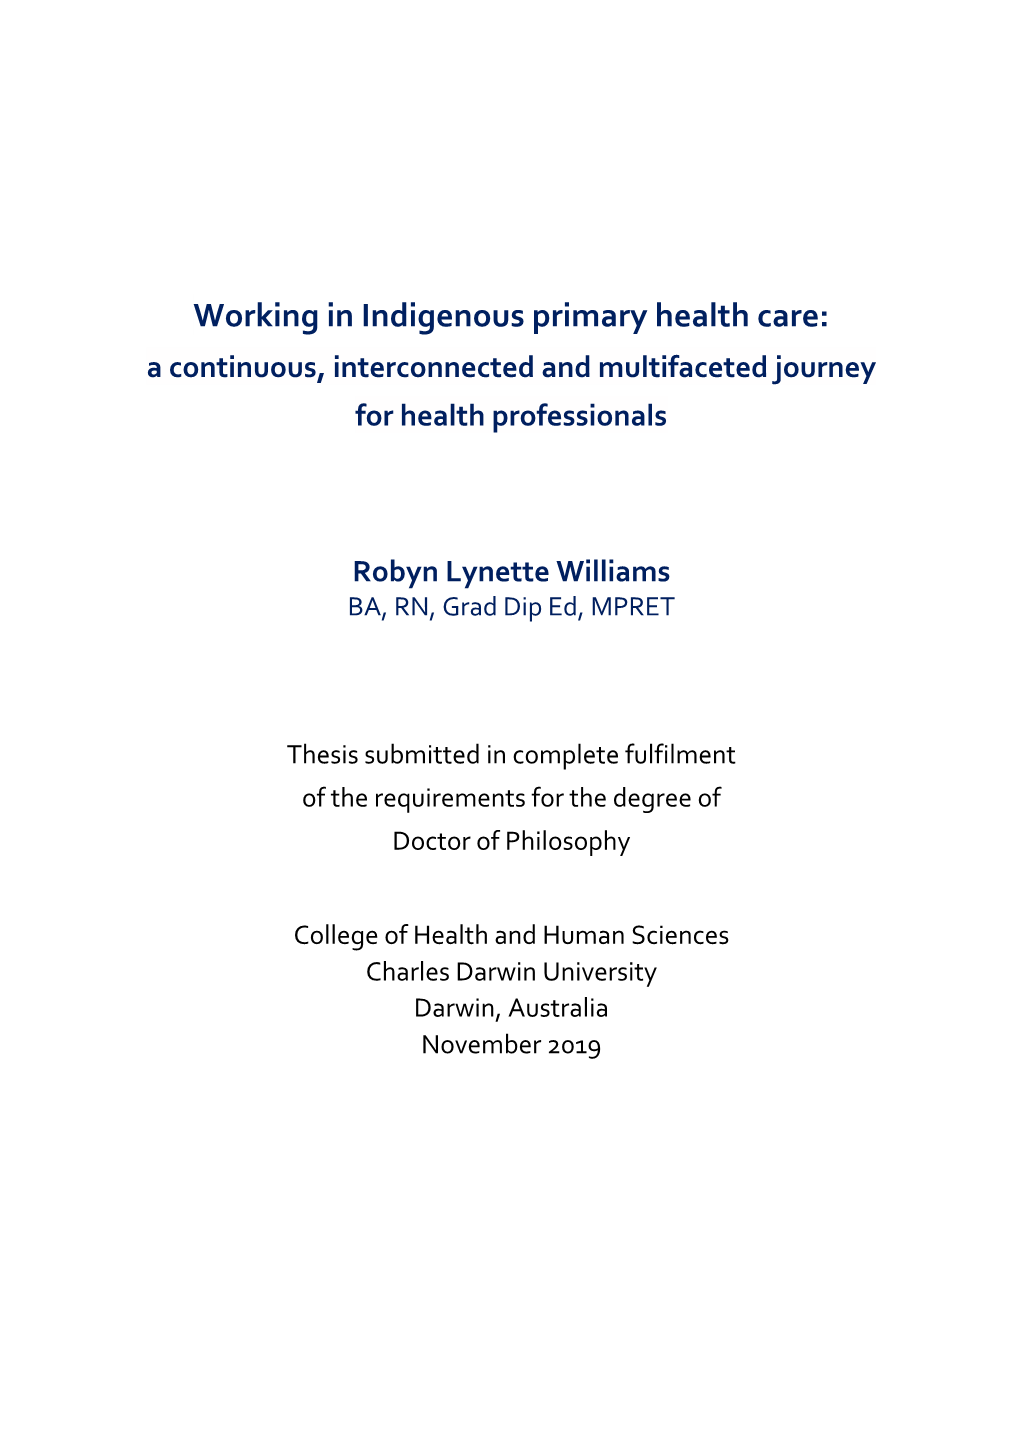 Working in Indigenous Primary Health Care: a Continuous, Interconnected and Multifaceted Journey for Health Professionals